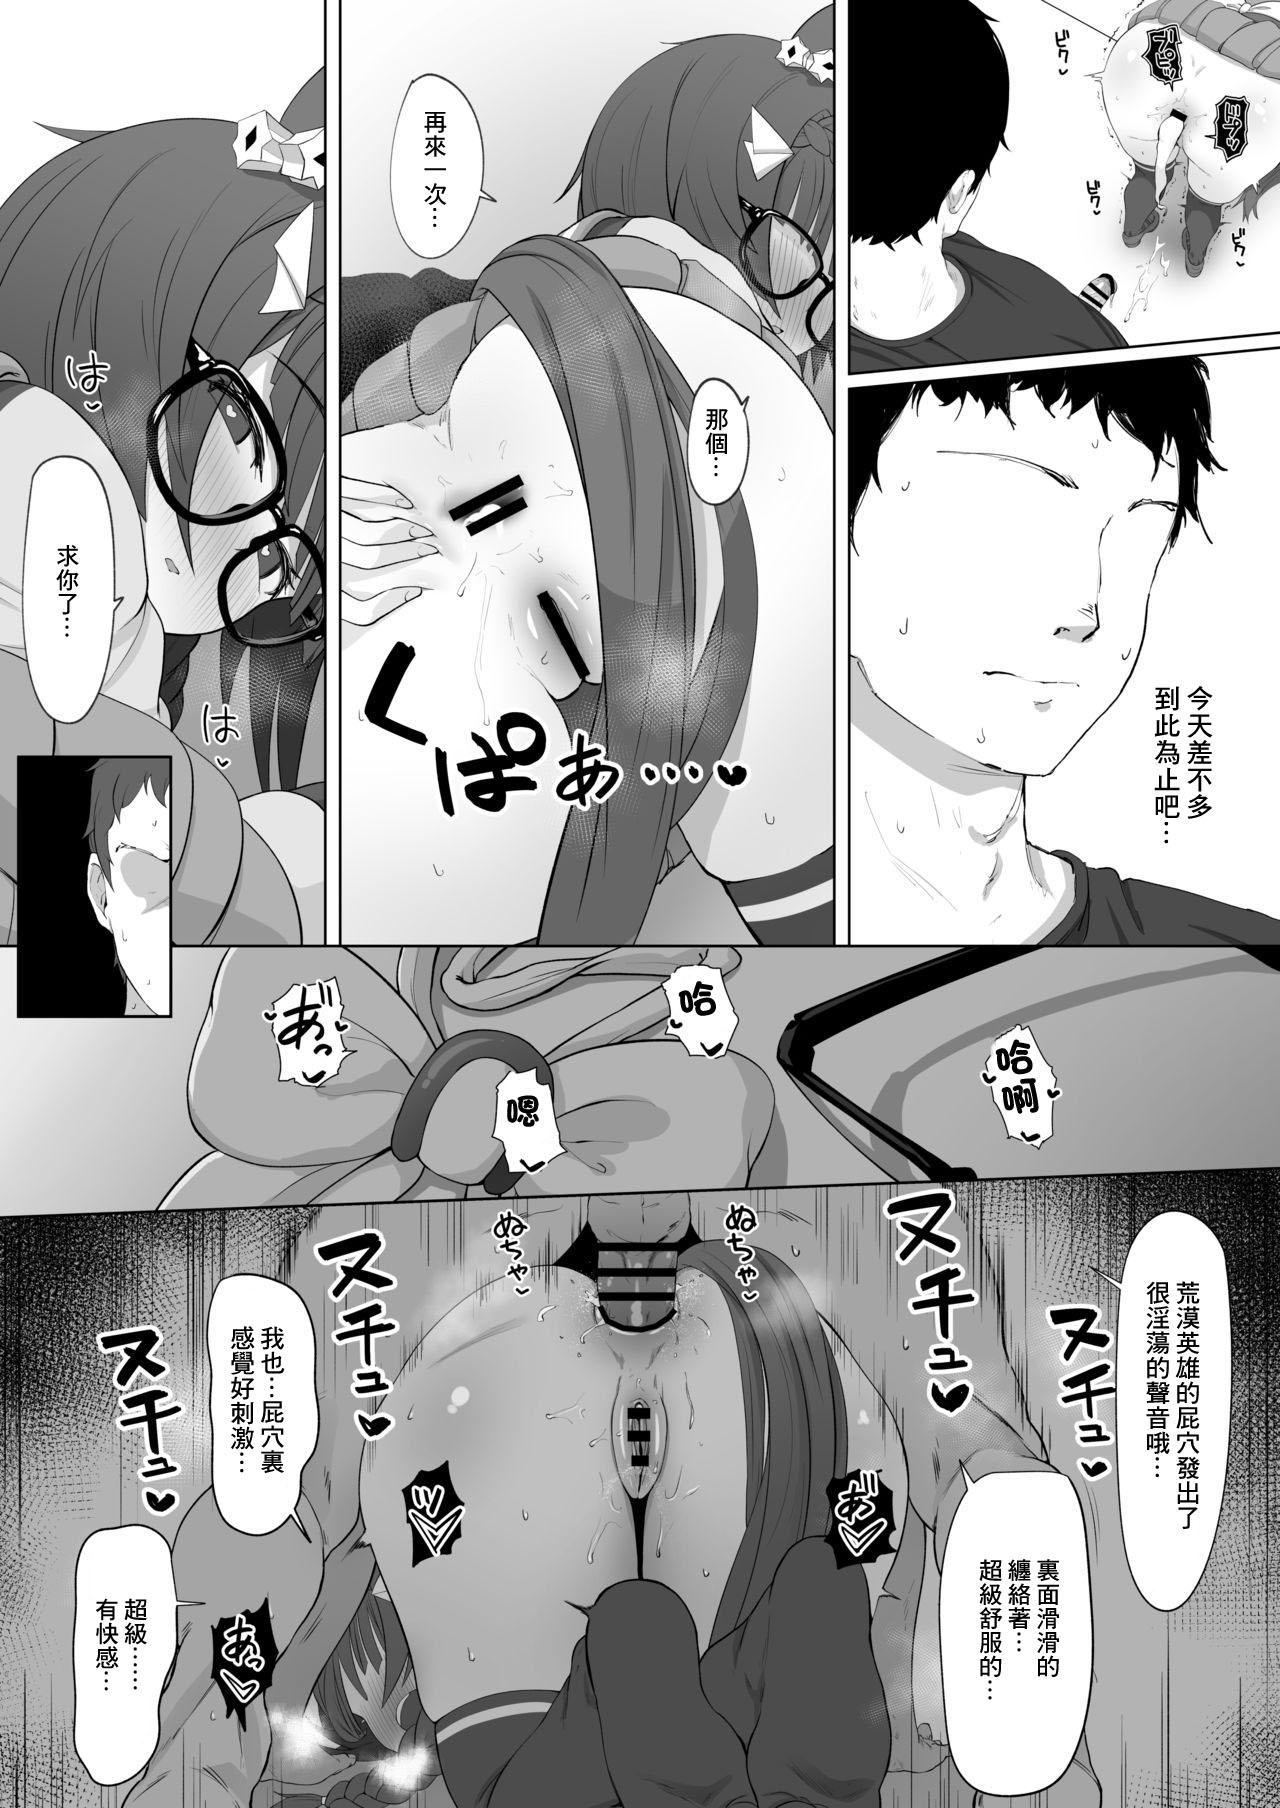 Milfporn Rob Roy - Uma musume pretty derby Old And Young - Page 7